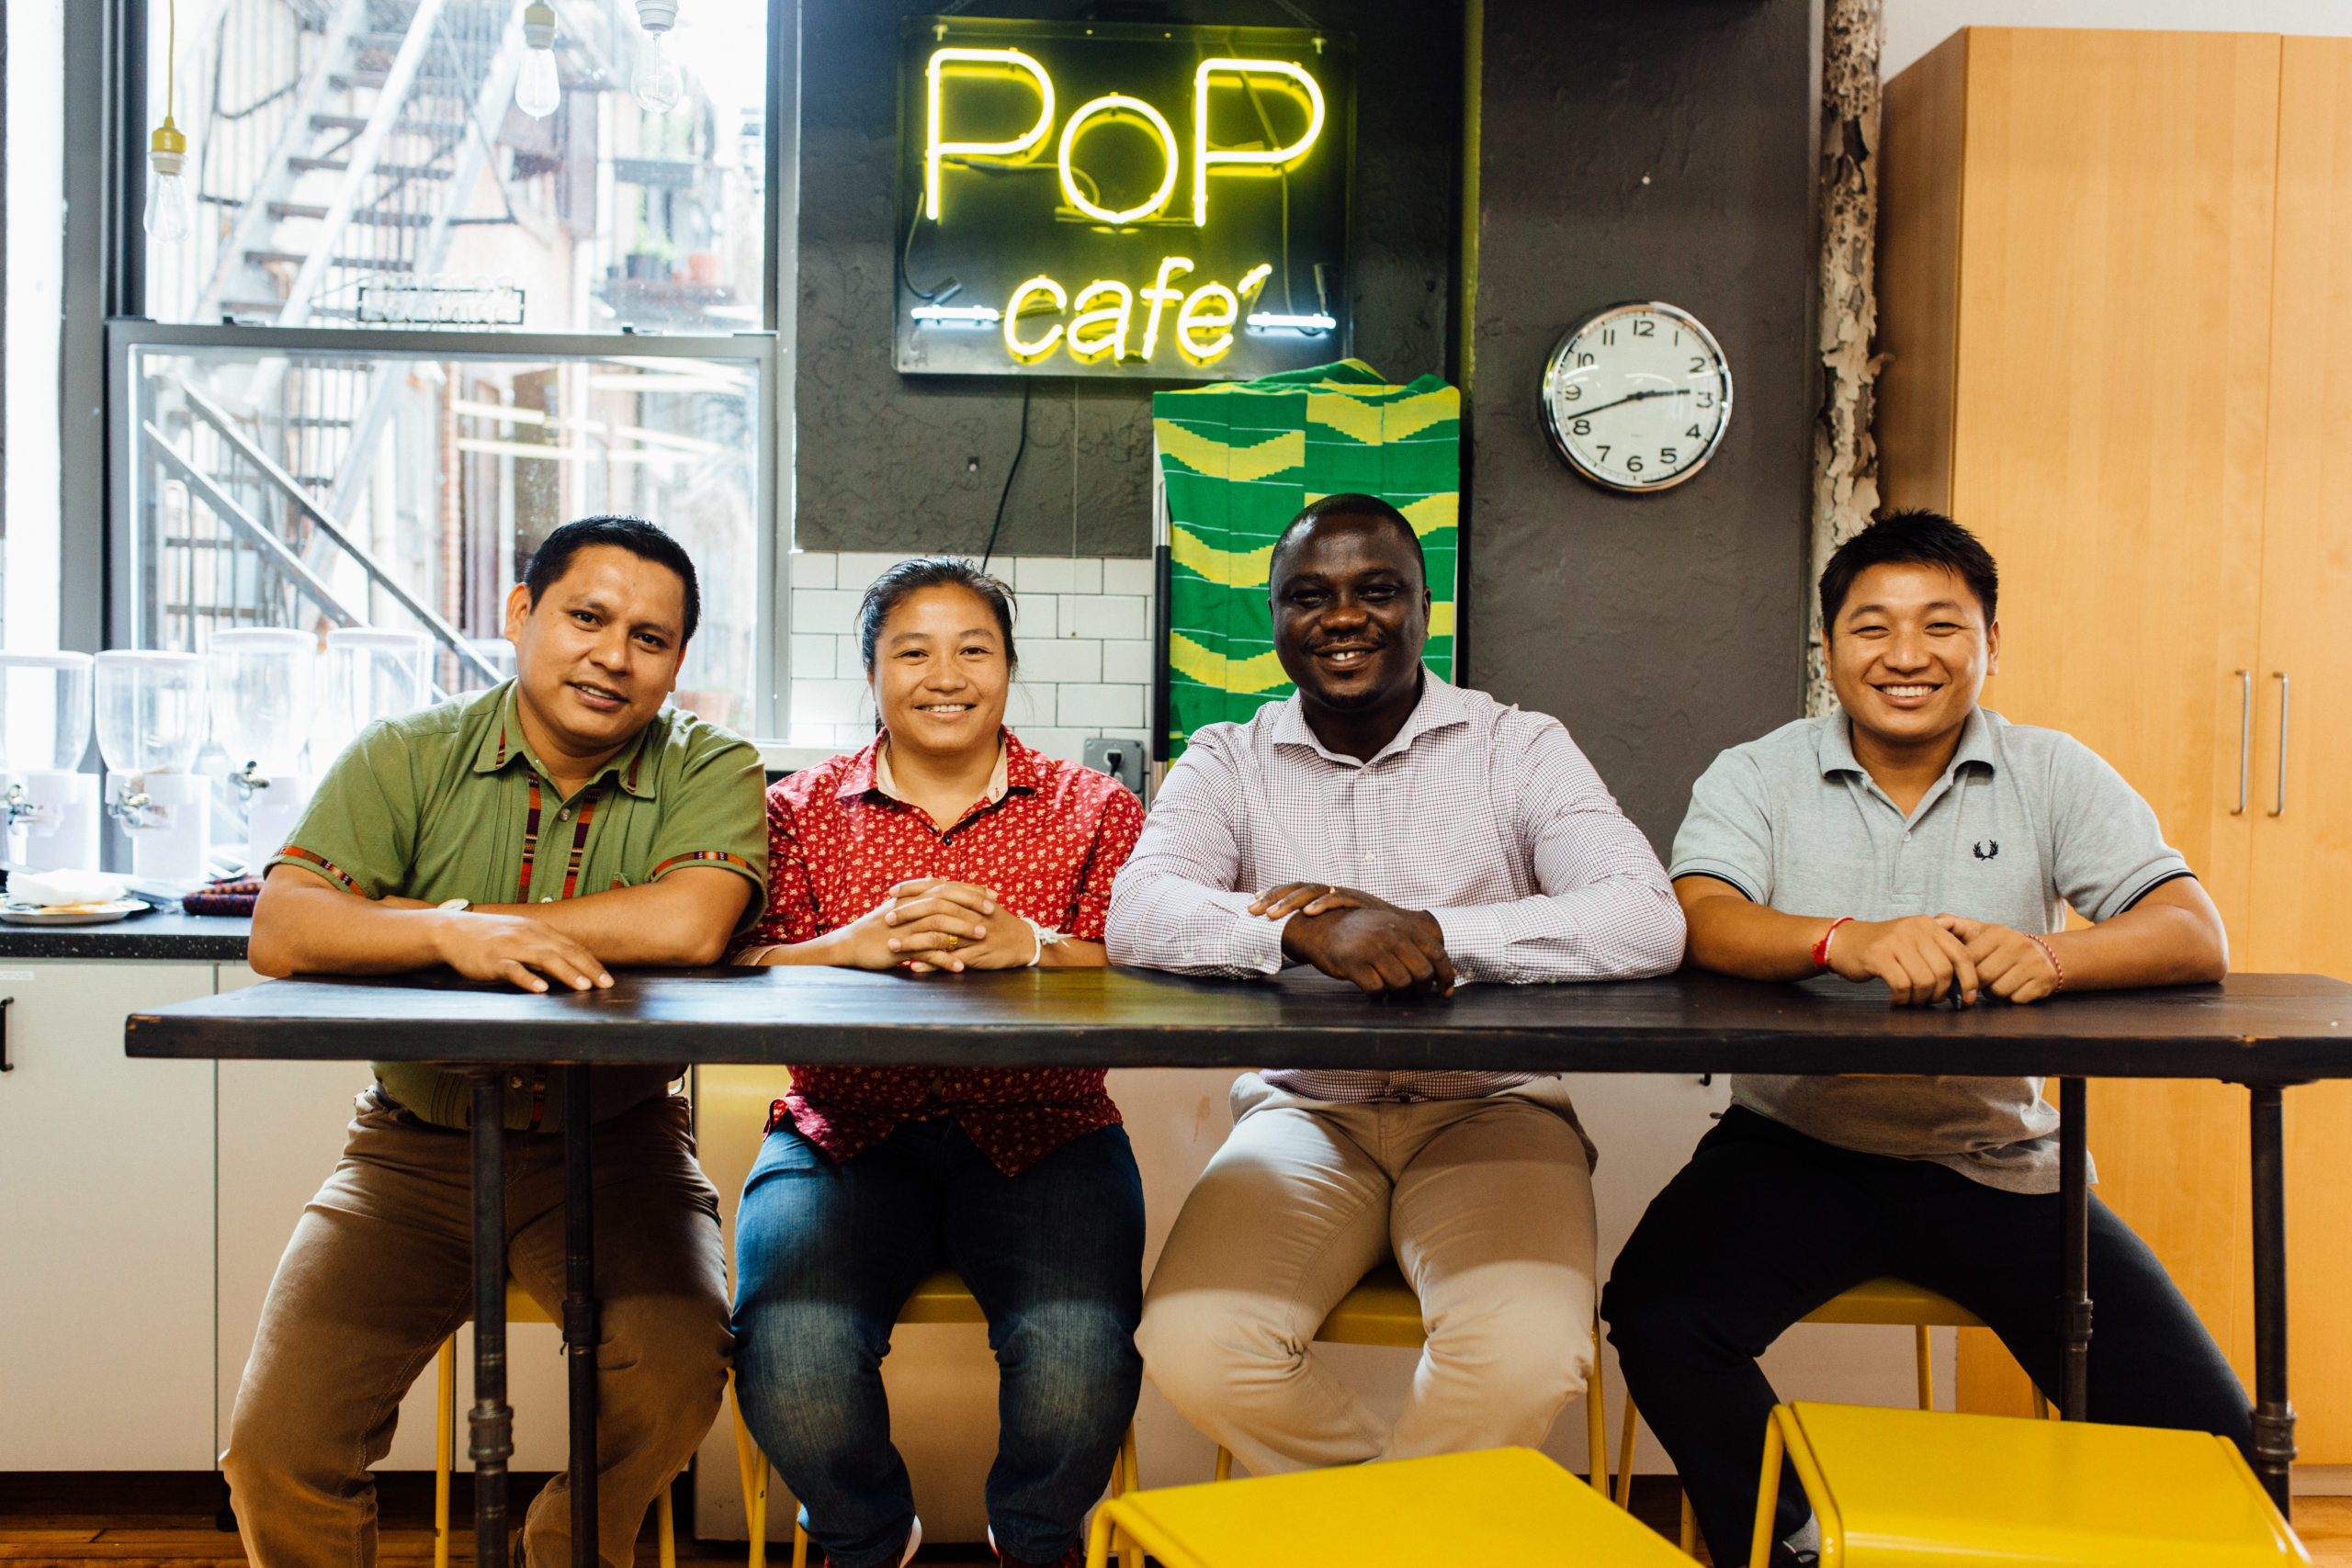 PoP's Country Directors (from left: Jorge Bolom, Lanoy Keosuvan, Freeman Gobah and Ya Laoxayda) visit the NYC office in 2016.